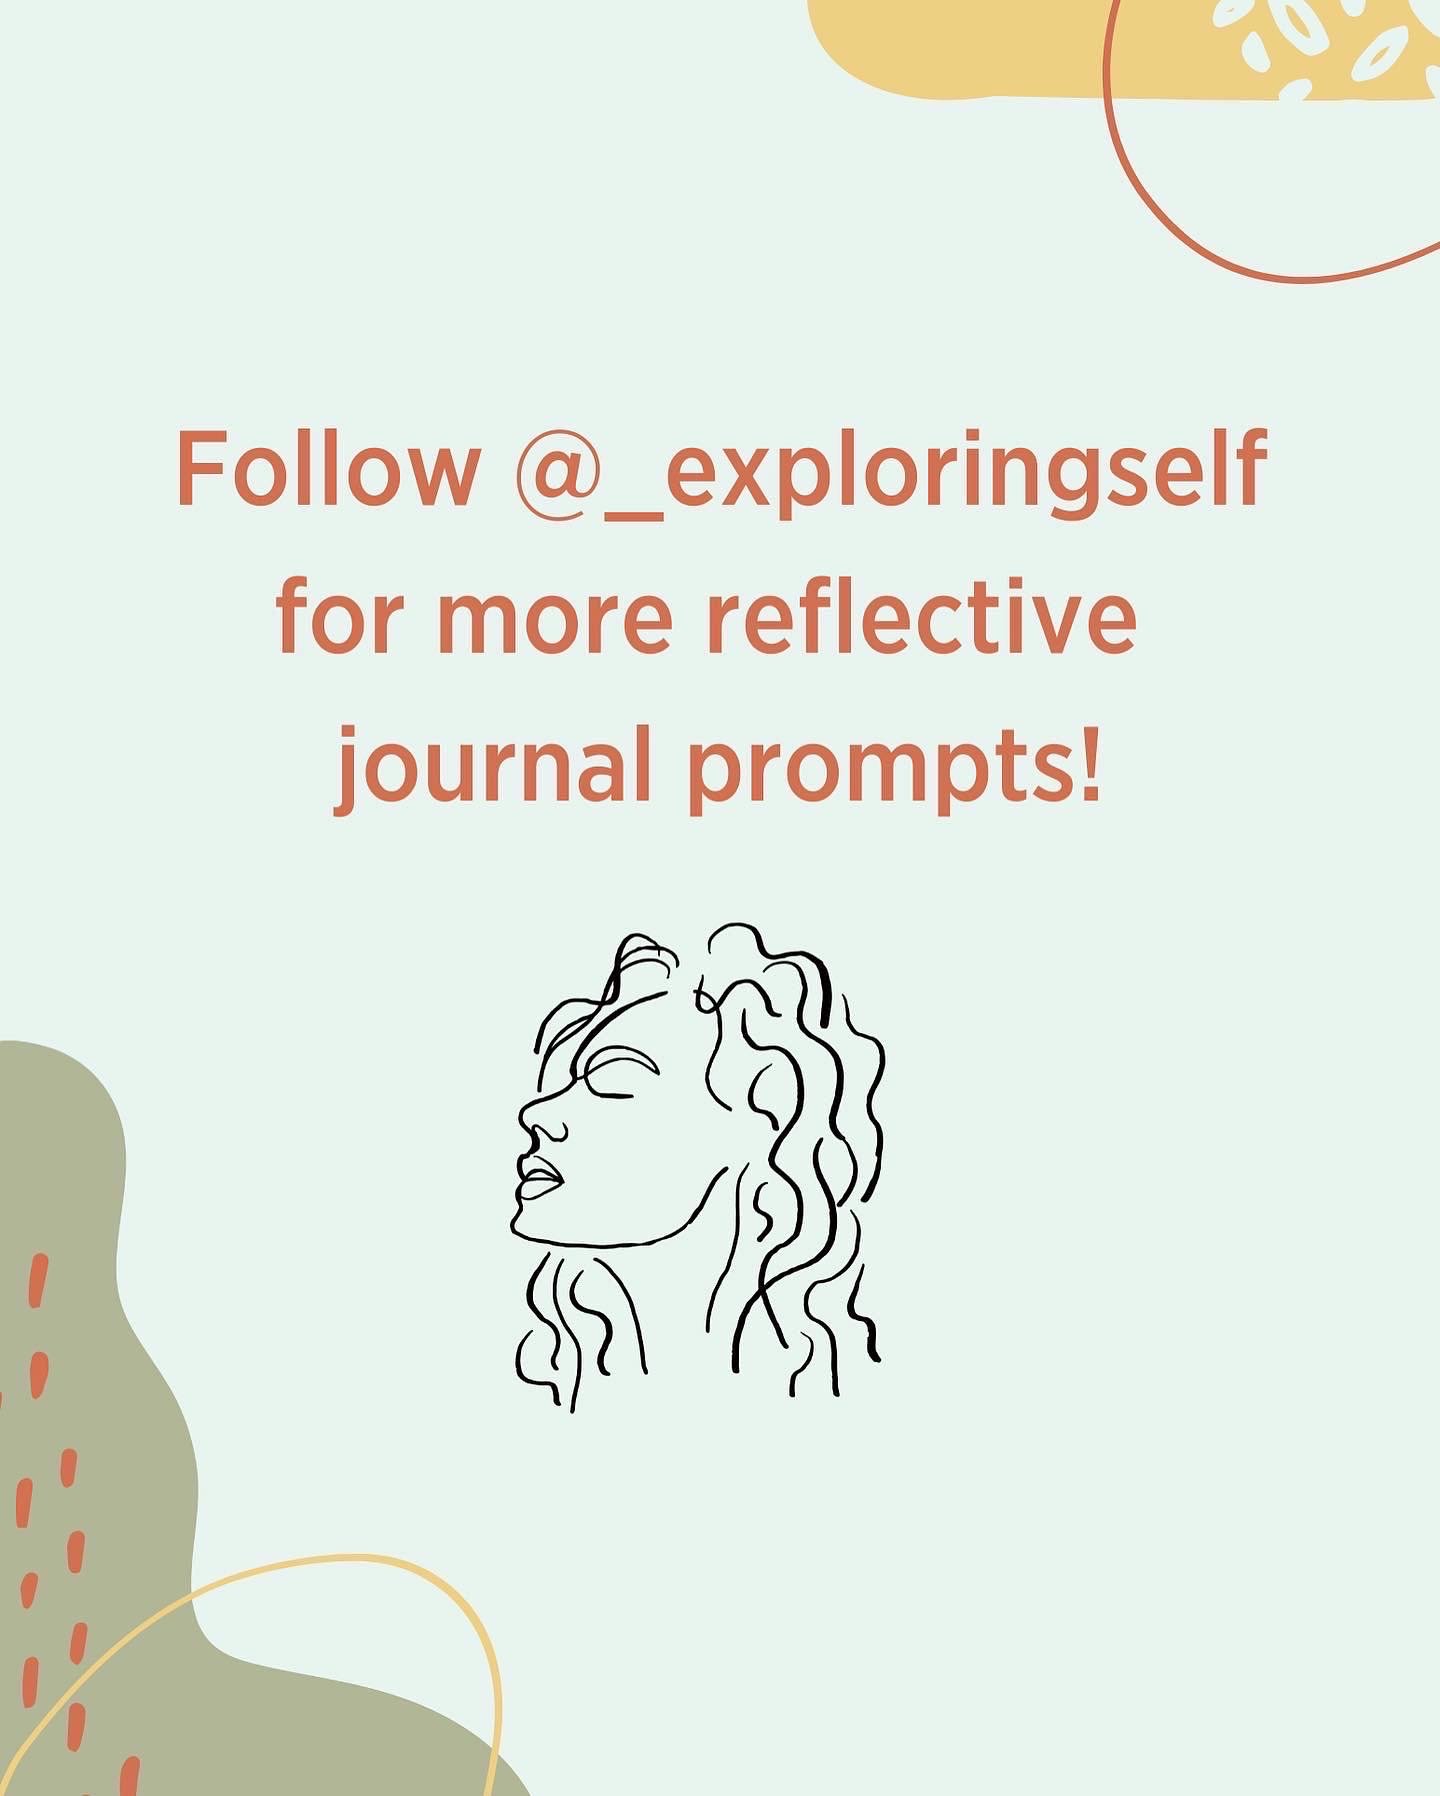 10 Self-Reflective Journal Prompts to Lead In to 2022 - Follow for More.jpg